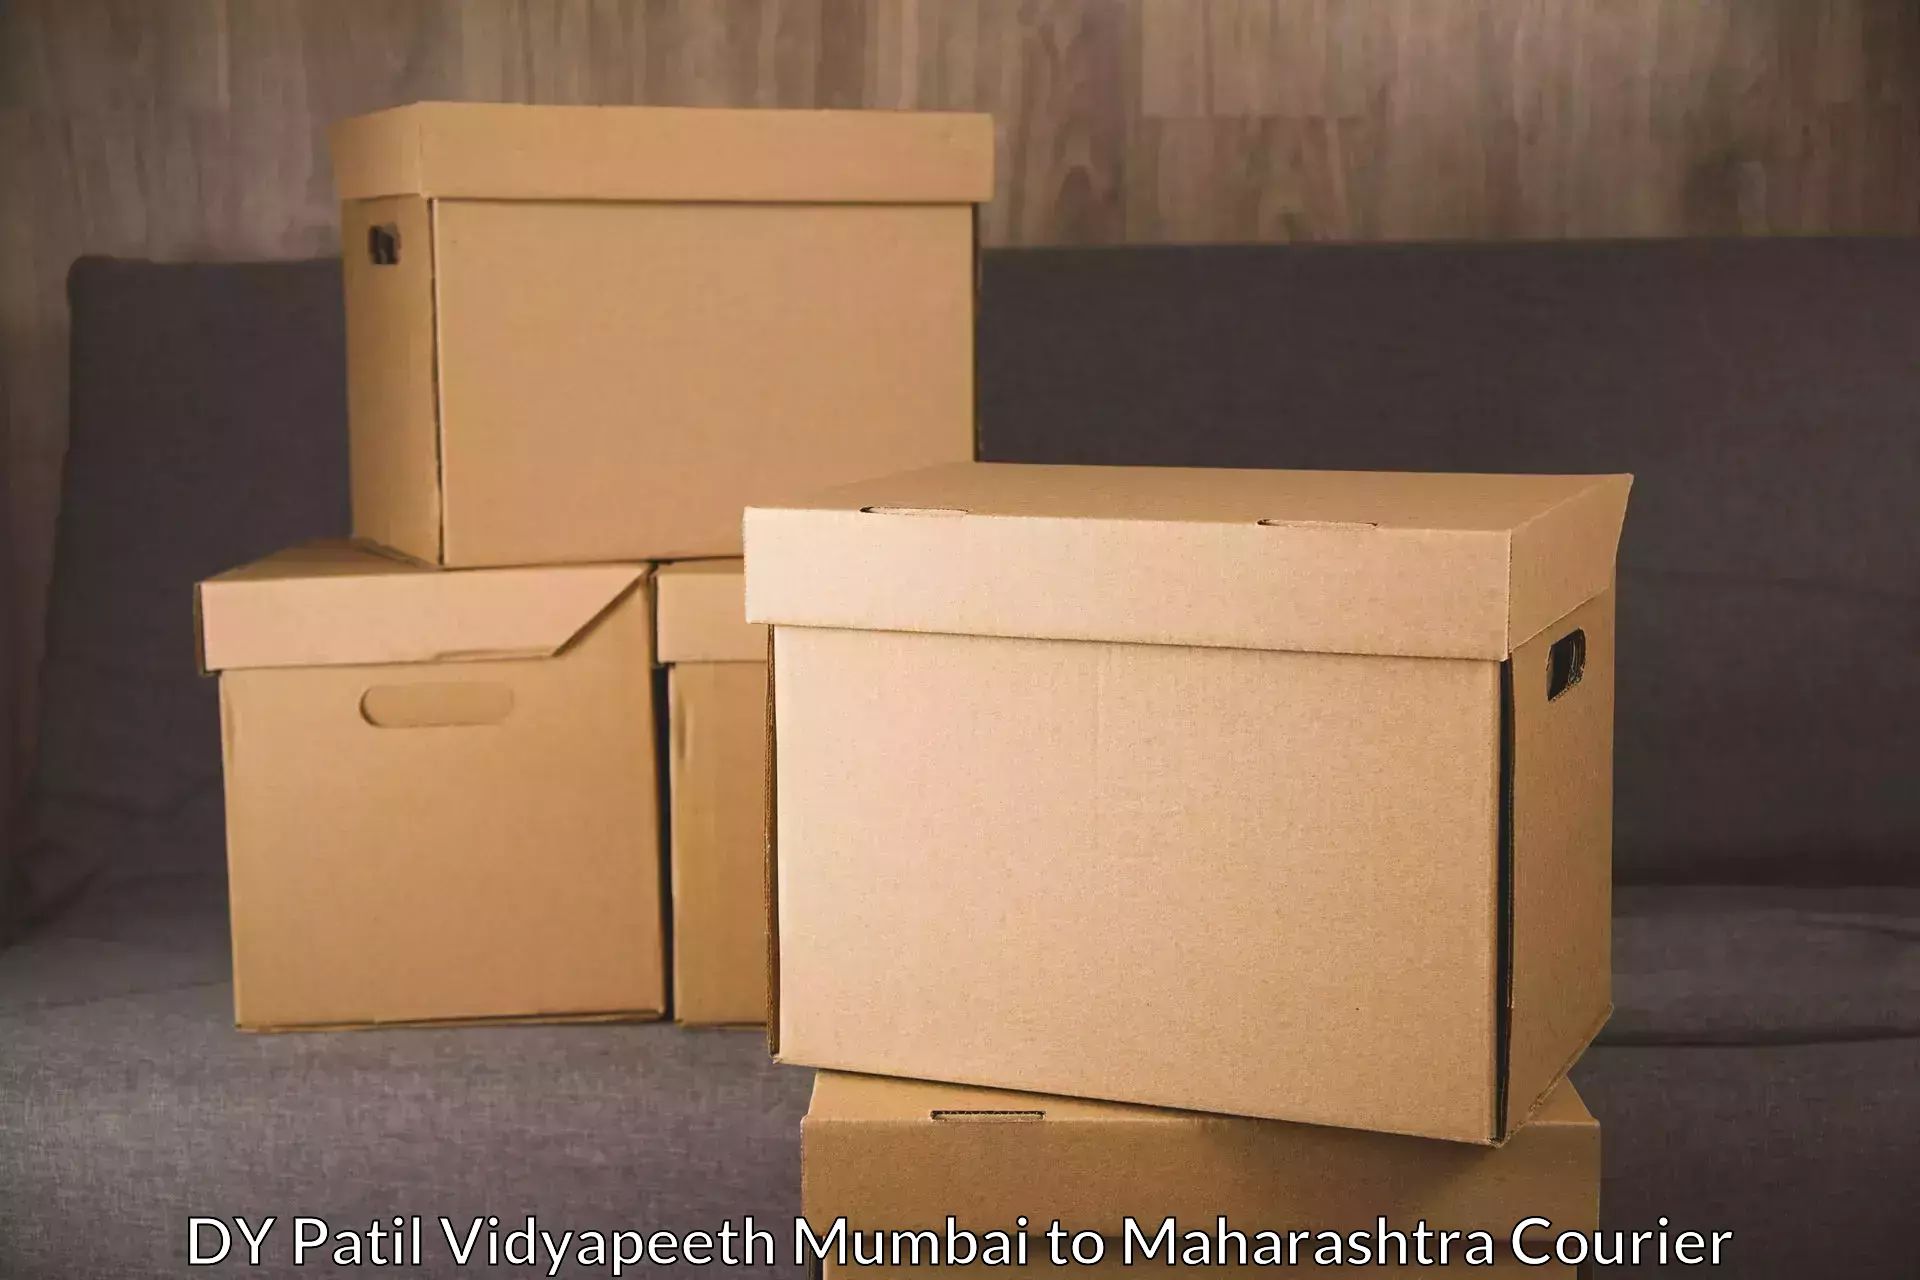 Nationwide parcel services DY Patil Vidyapeeth Mumbai to Aheri